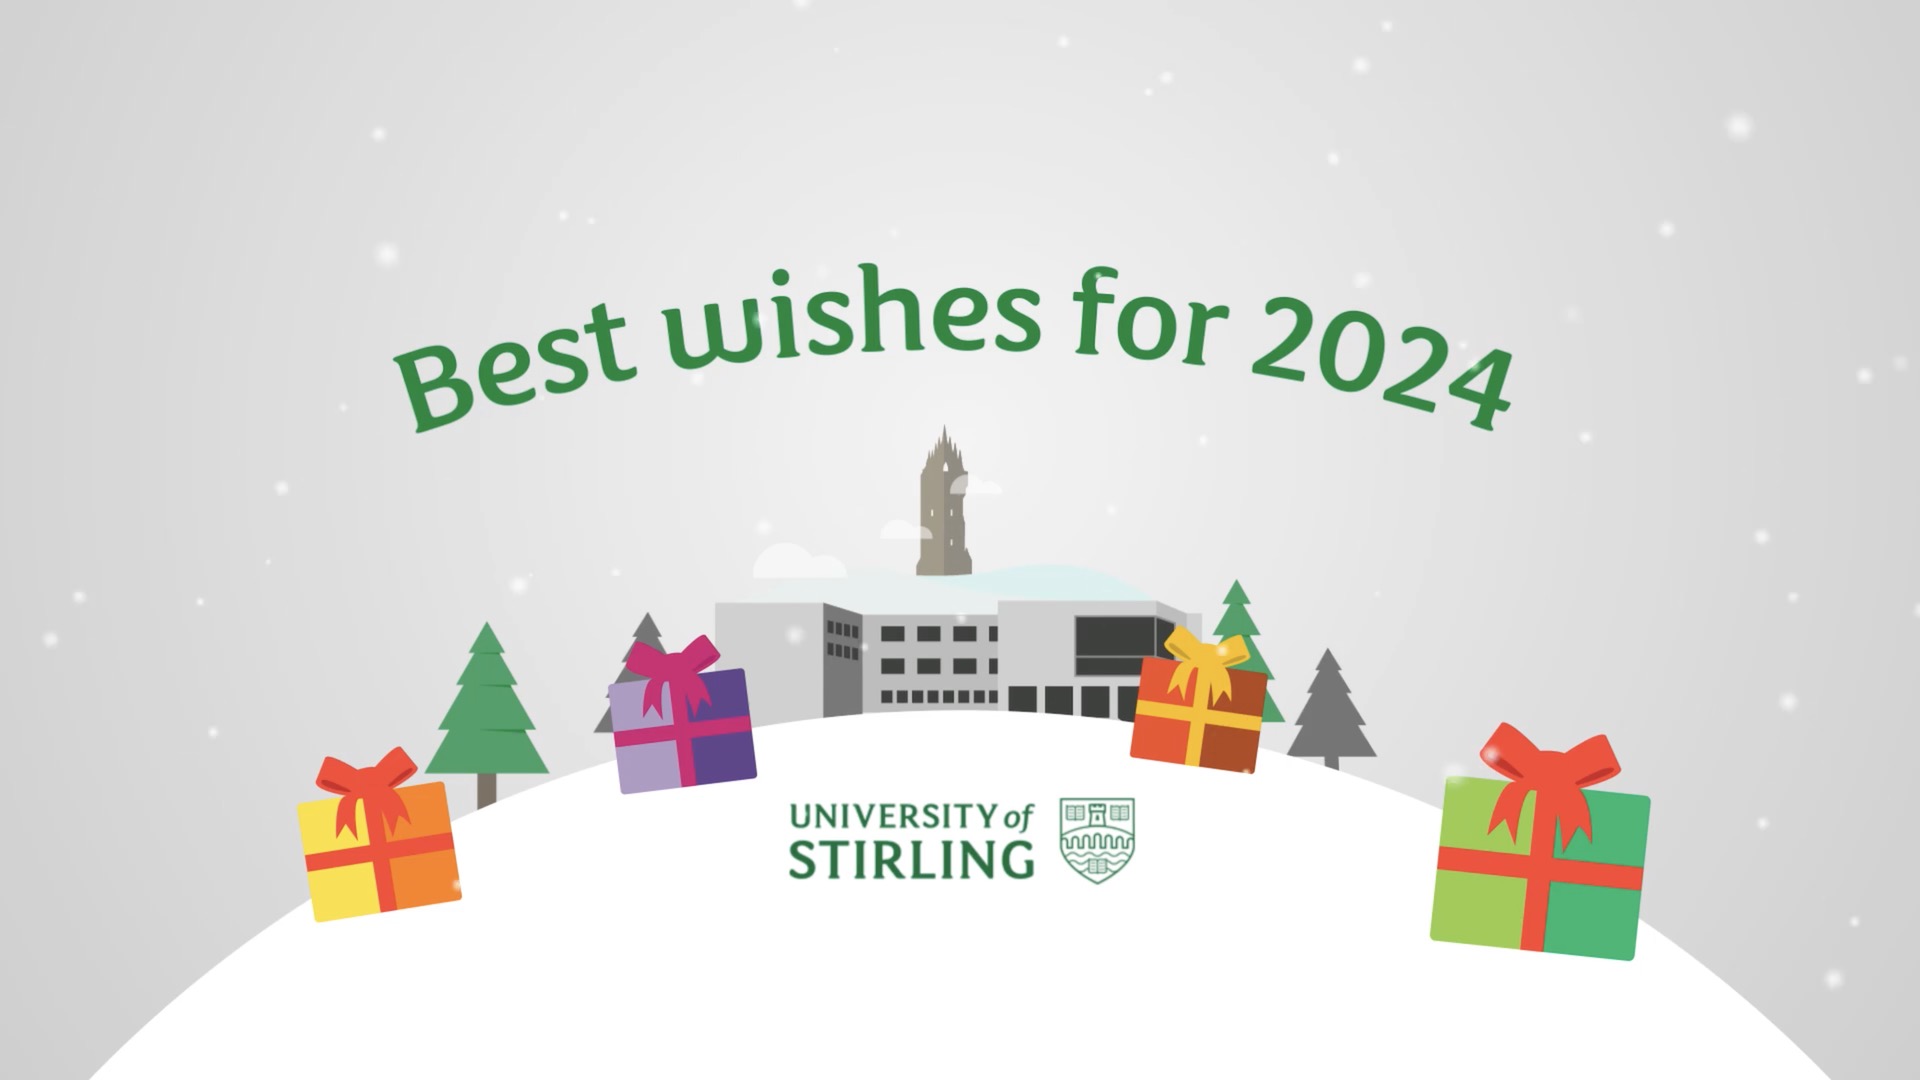 Merry Christmas from the University of Stirling. An illustration of the University of Stirling campus on a winter day. Snow falls gently as the words Best Wishes for 2024 hang in the air.